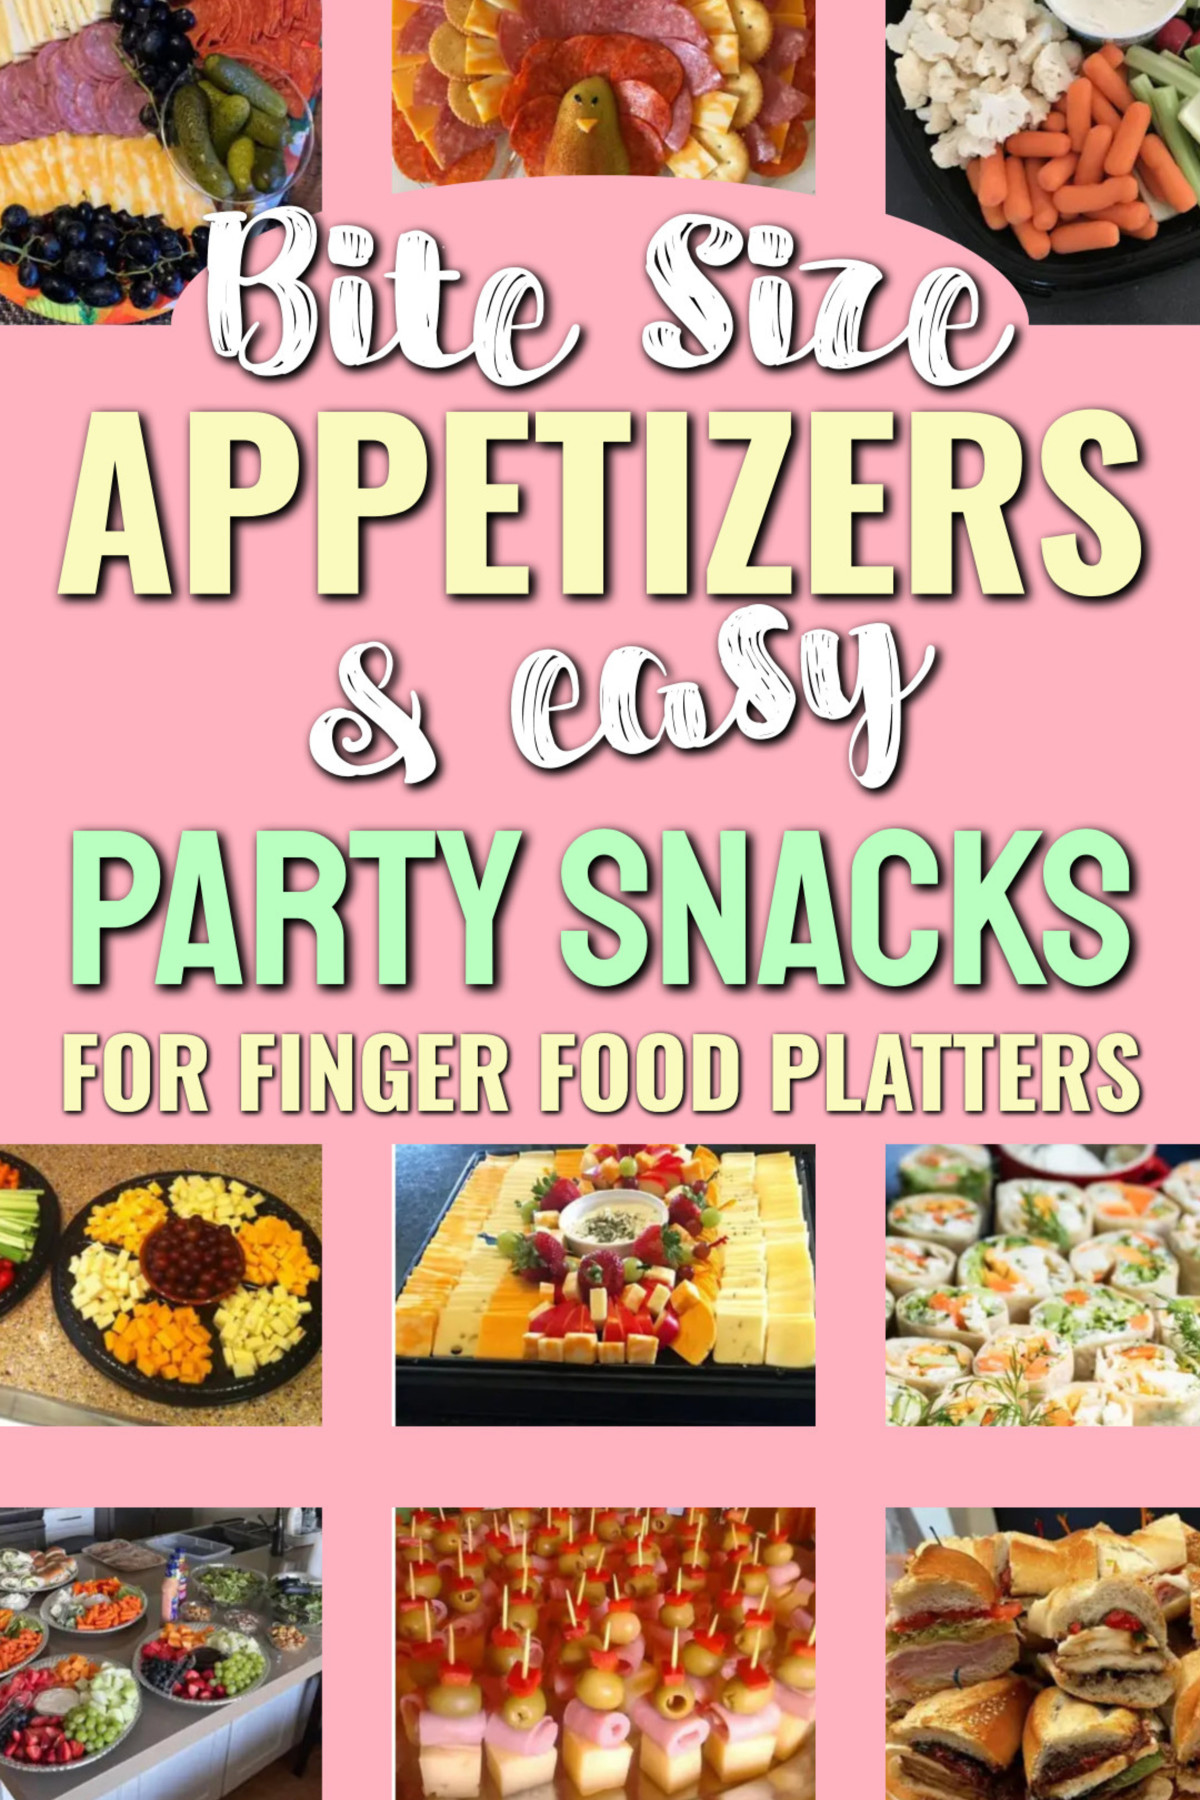 bite size appetizers easy party snacks for party platters